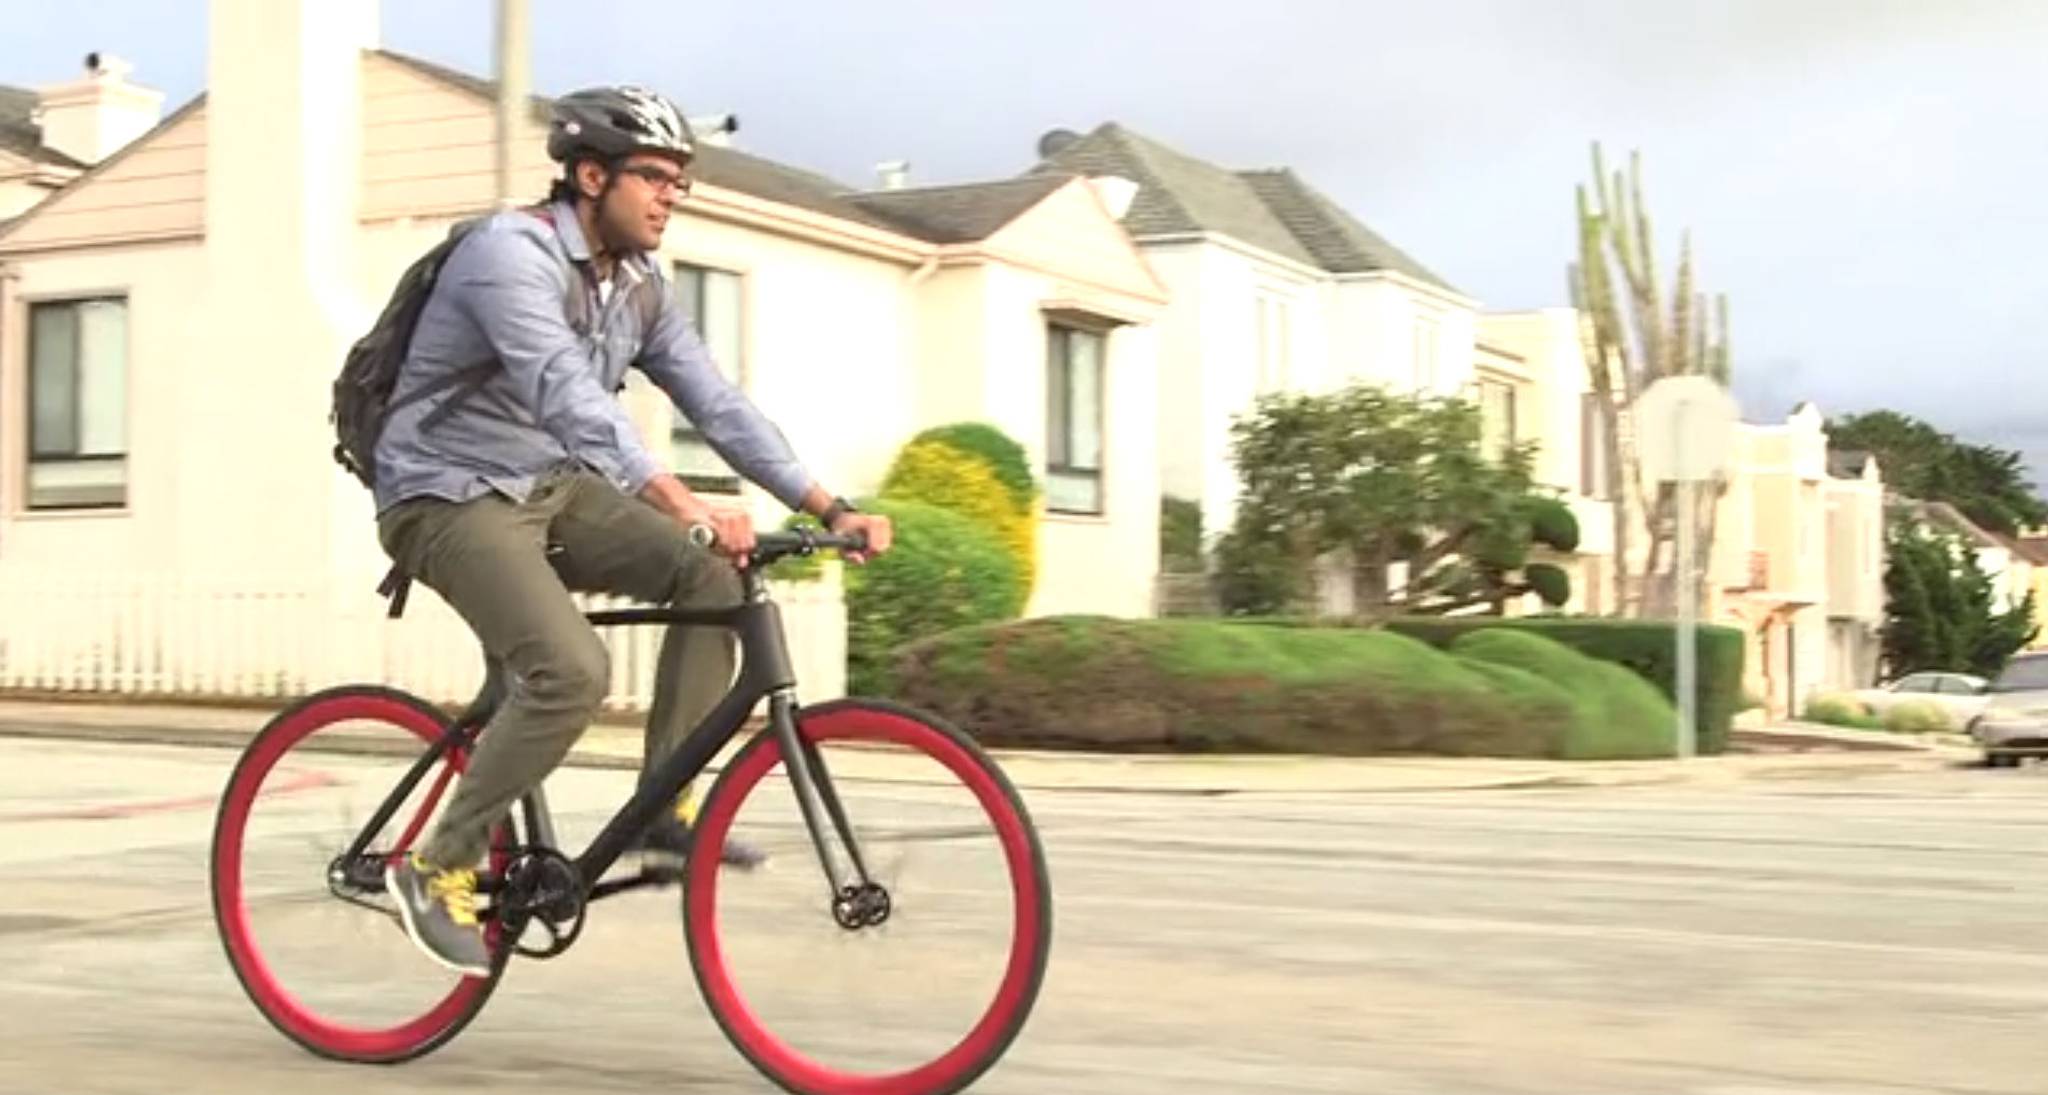 A smart bike for safer cycling